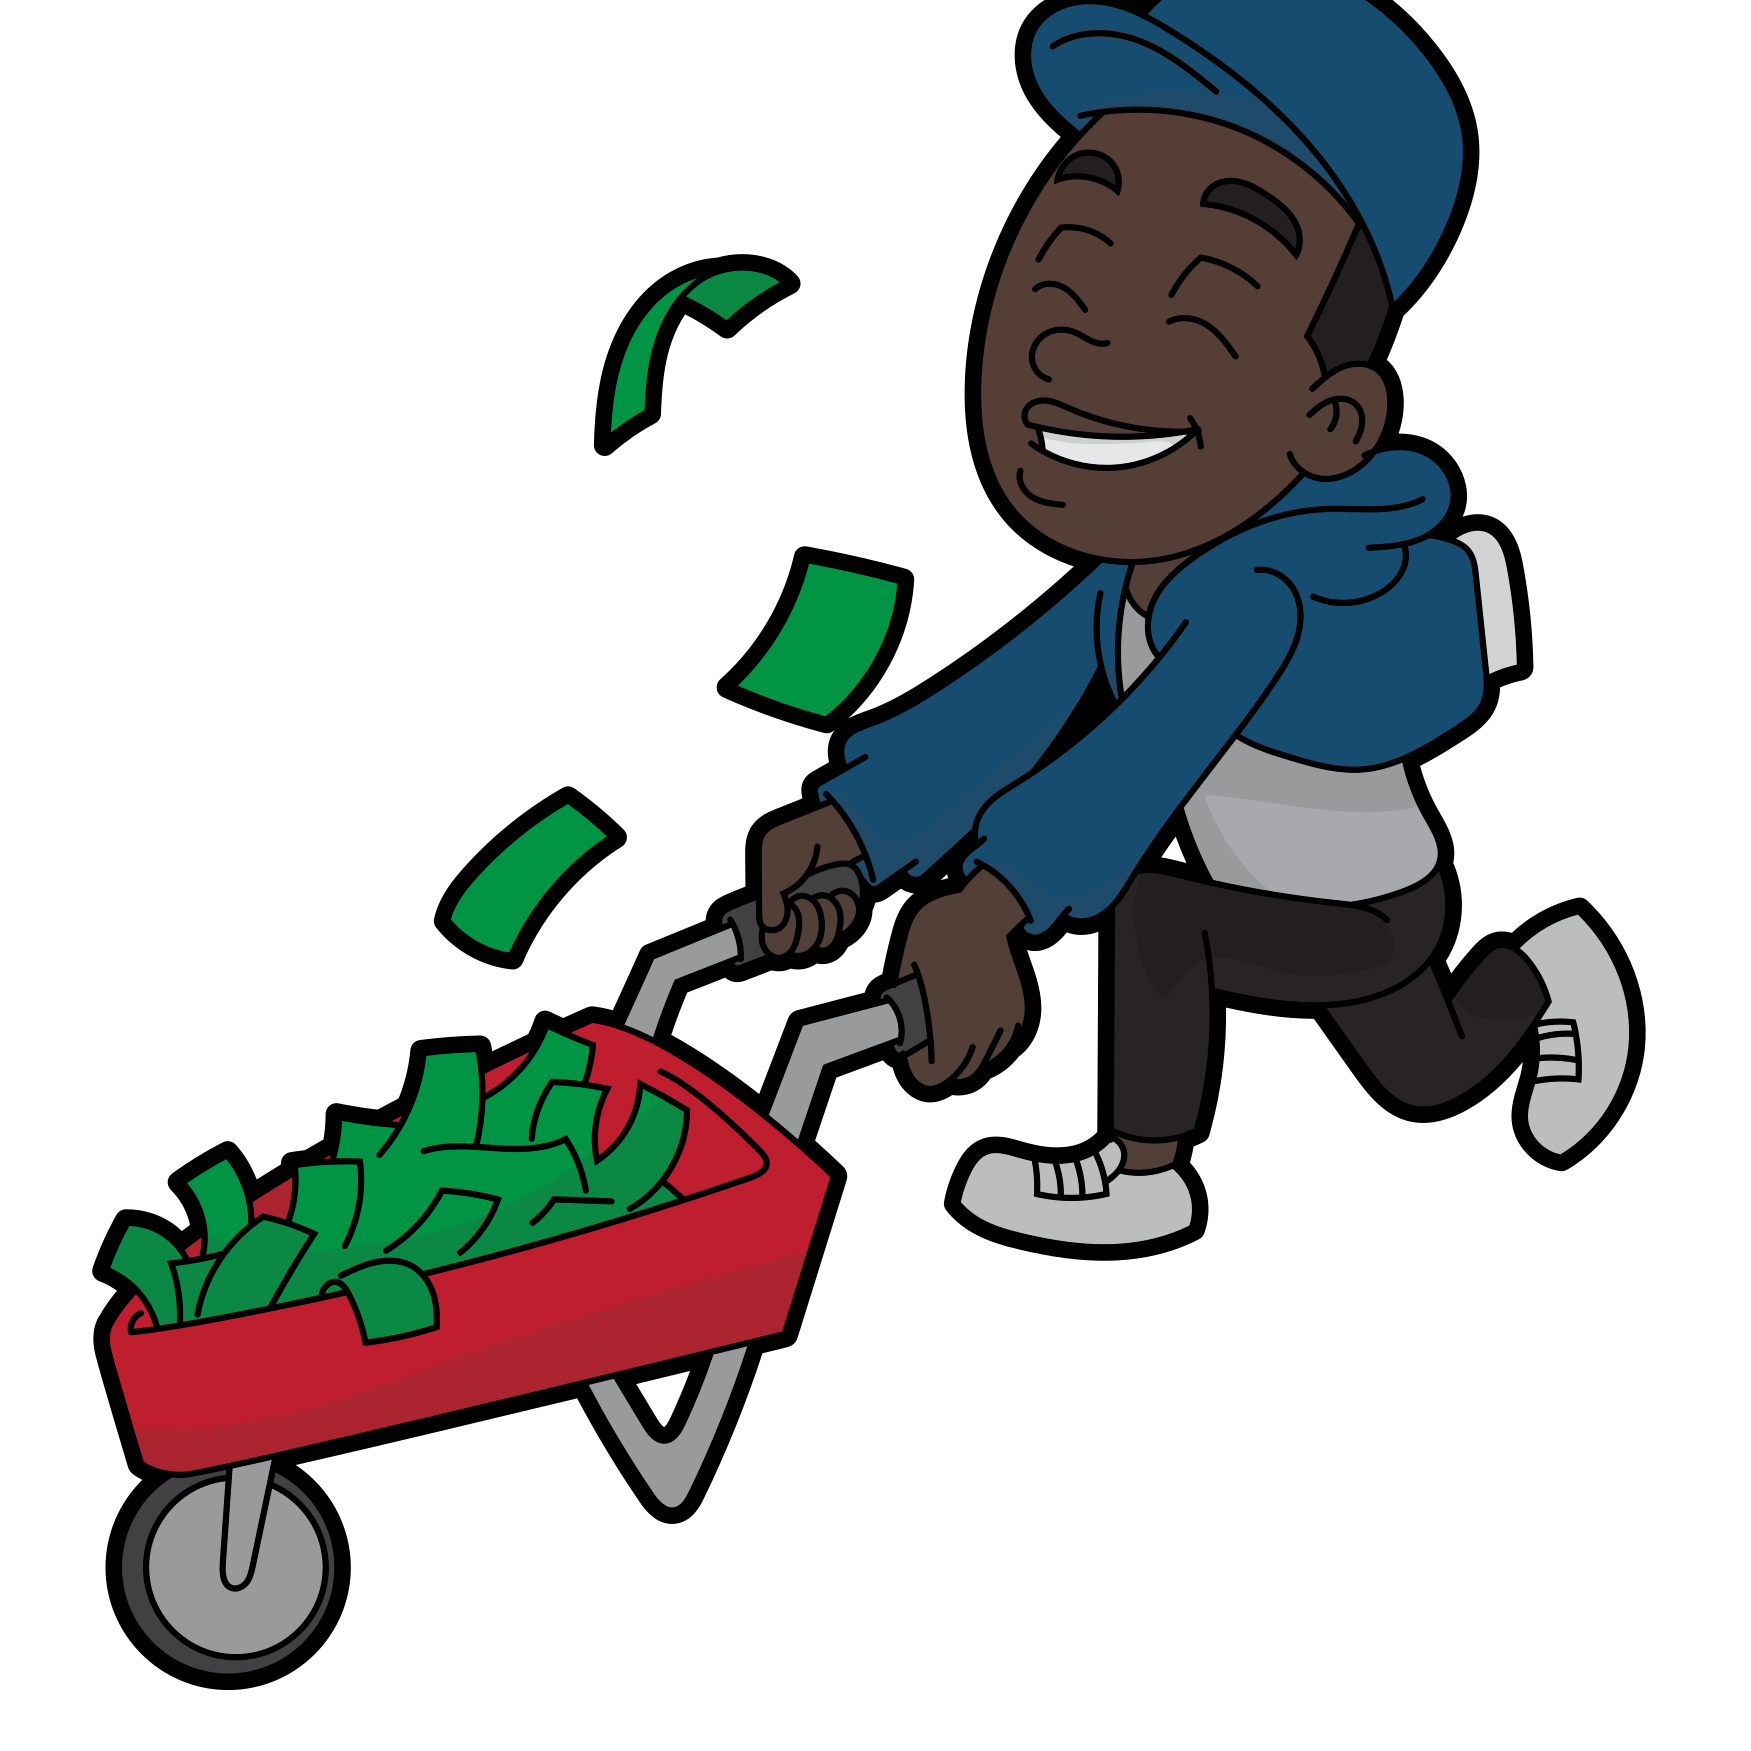 a picture of a black animated cartoon character walking away jolly pushing a wheel barrel full of green fiat money.